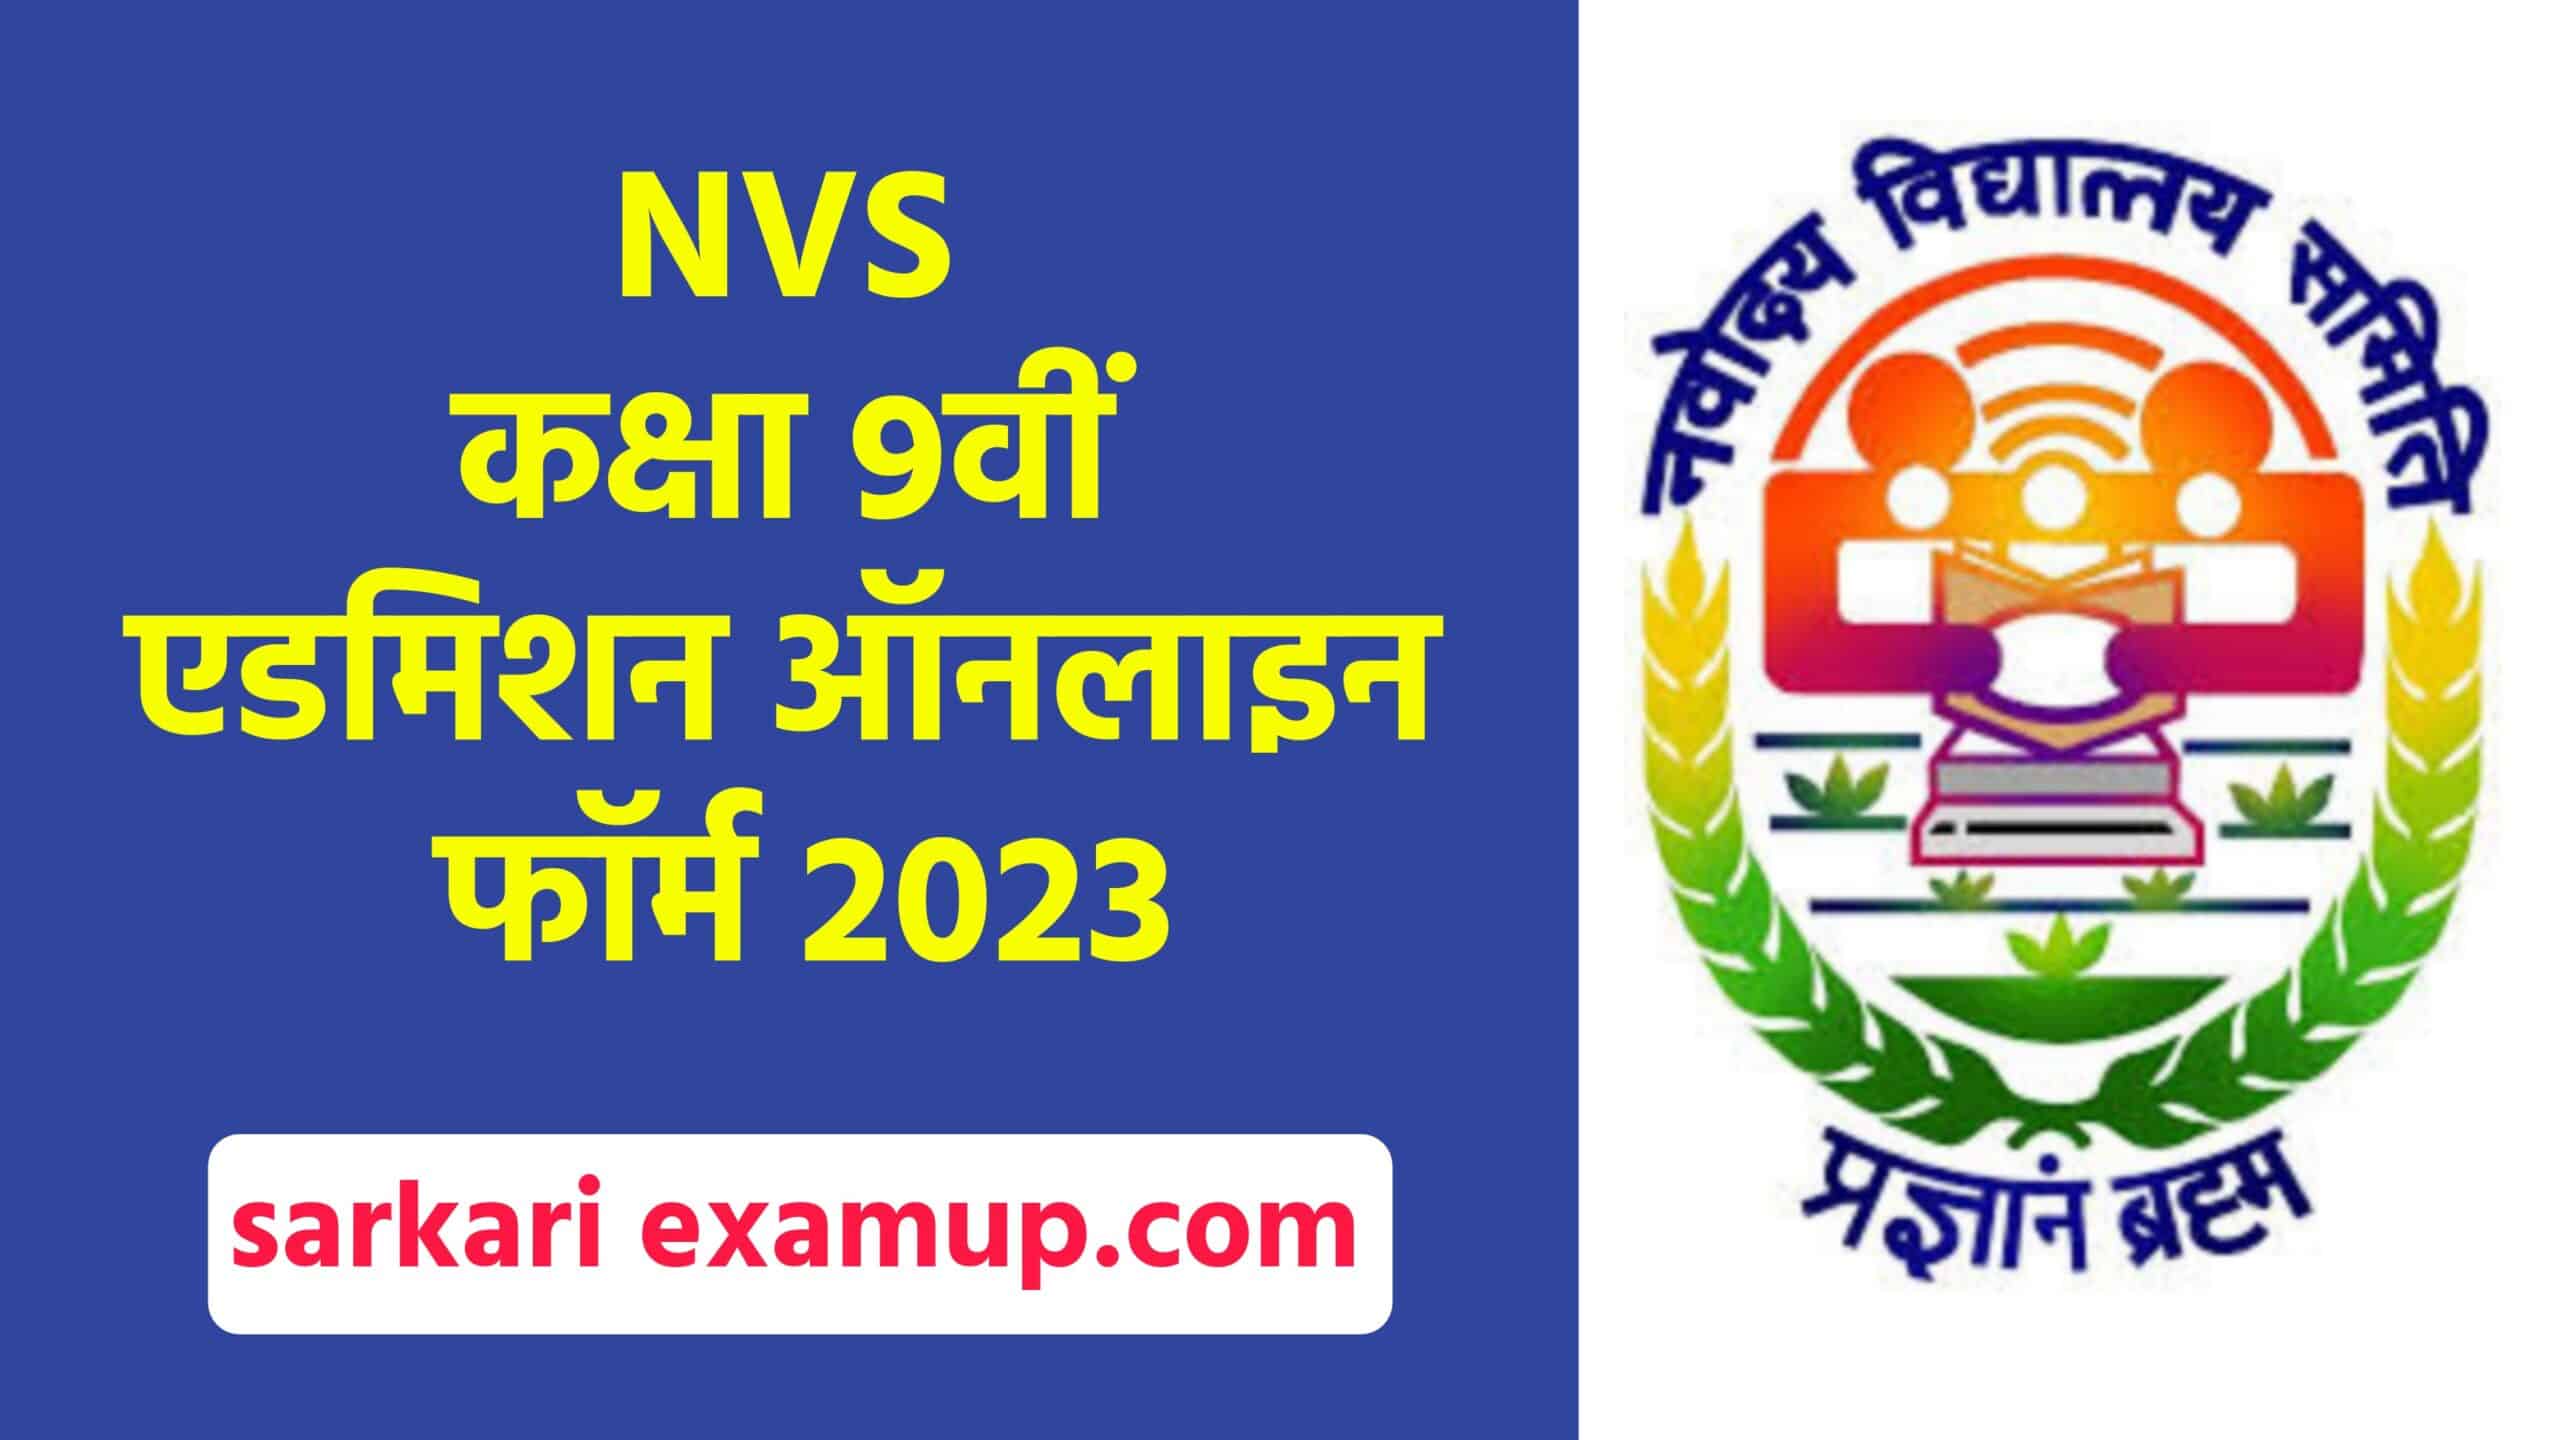 NVS Class 9th Admission Online Form 2023